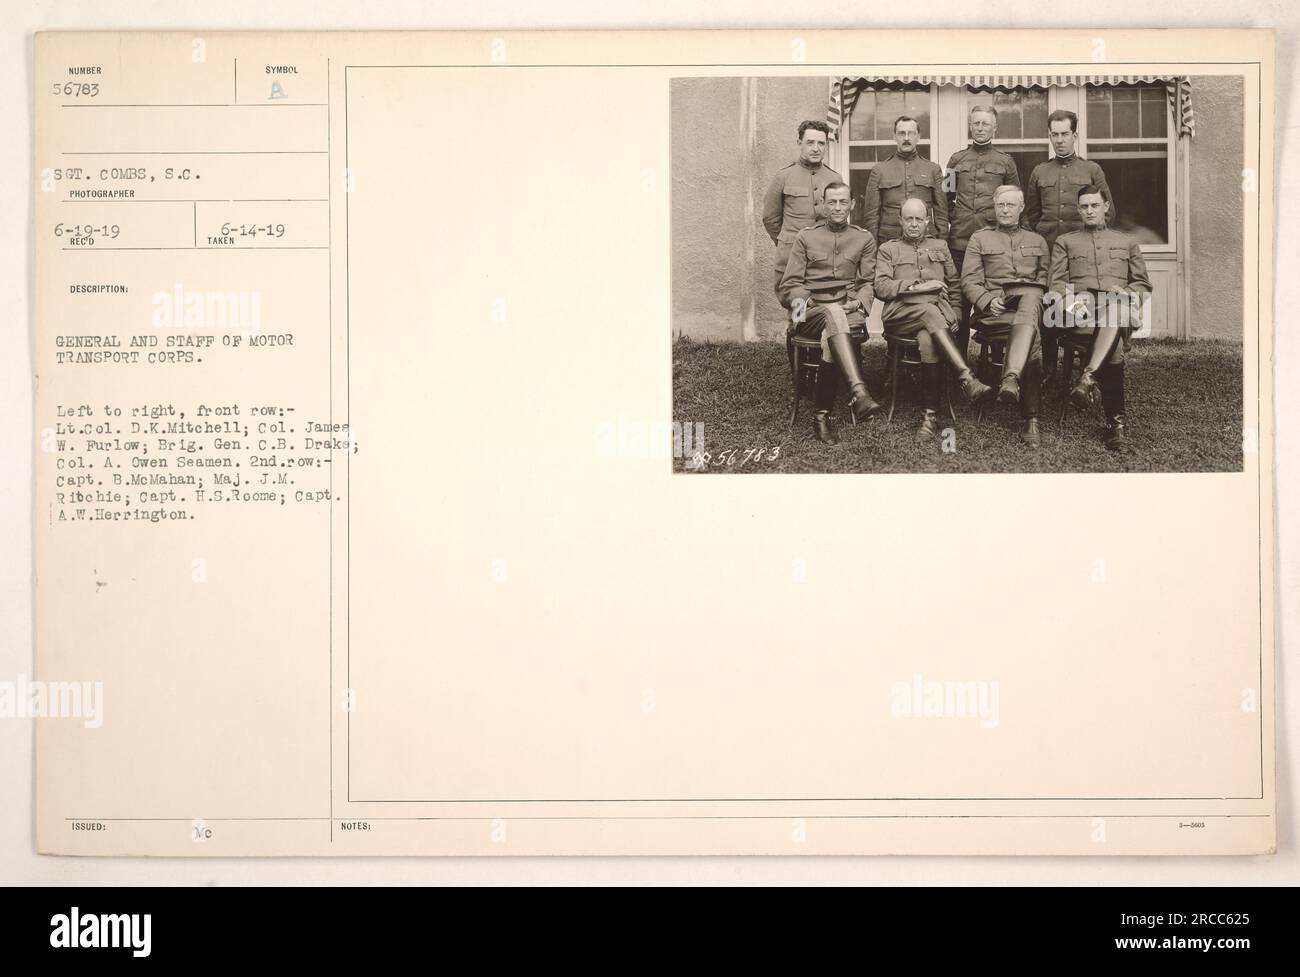 General and staff of the Motor Transport Corps, photographed on June 14, 1919. Pictured from left to right in the front row: Lt. Col. D.K. Mitchell, Col. James W. Furlow, Brig. Gen. C.B. Drake, Col. A. Owen Seamen. In the second row: Capt. B. McMahan, Maj. J.M. Ritchie, Capt. H.S. Roome, Capt. A.W. Herrington. Photo taken by Sgt. Combs. Stock Photo